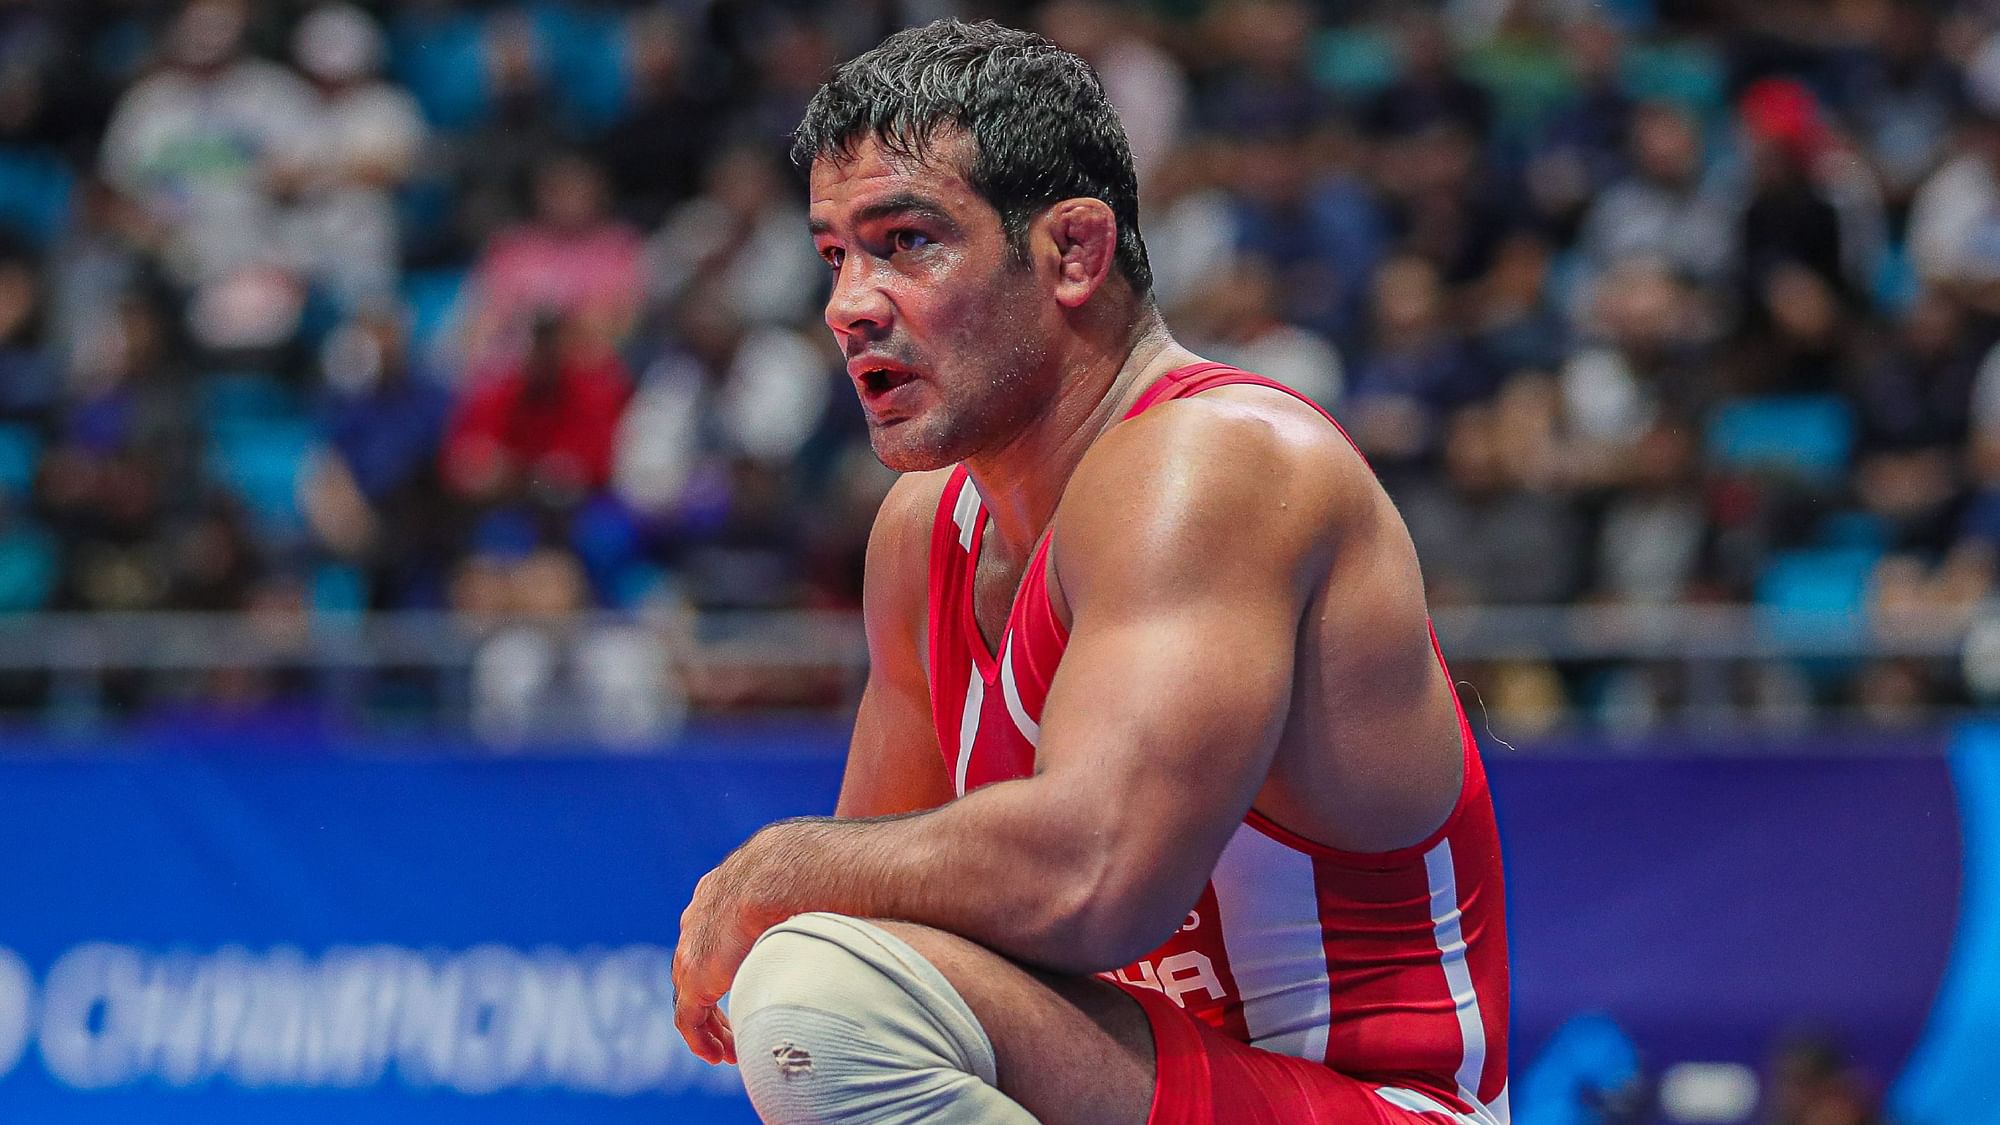 Veteran wrestler Sushil Kumar has been named in the FIR by police for an incident at the Chhatrasal Stadium complex.